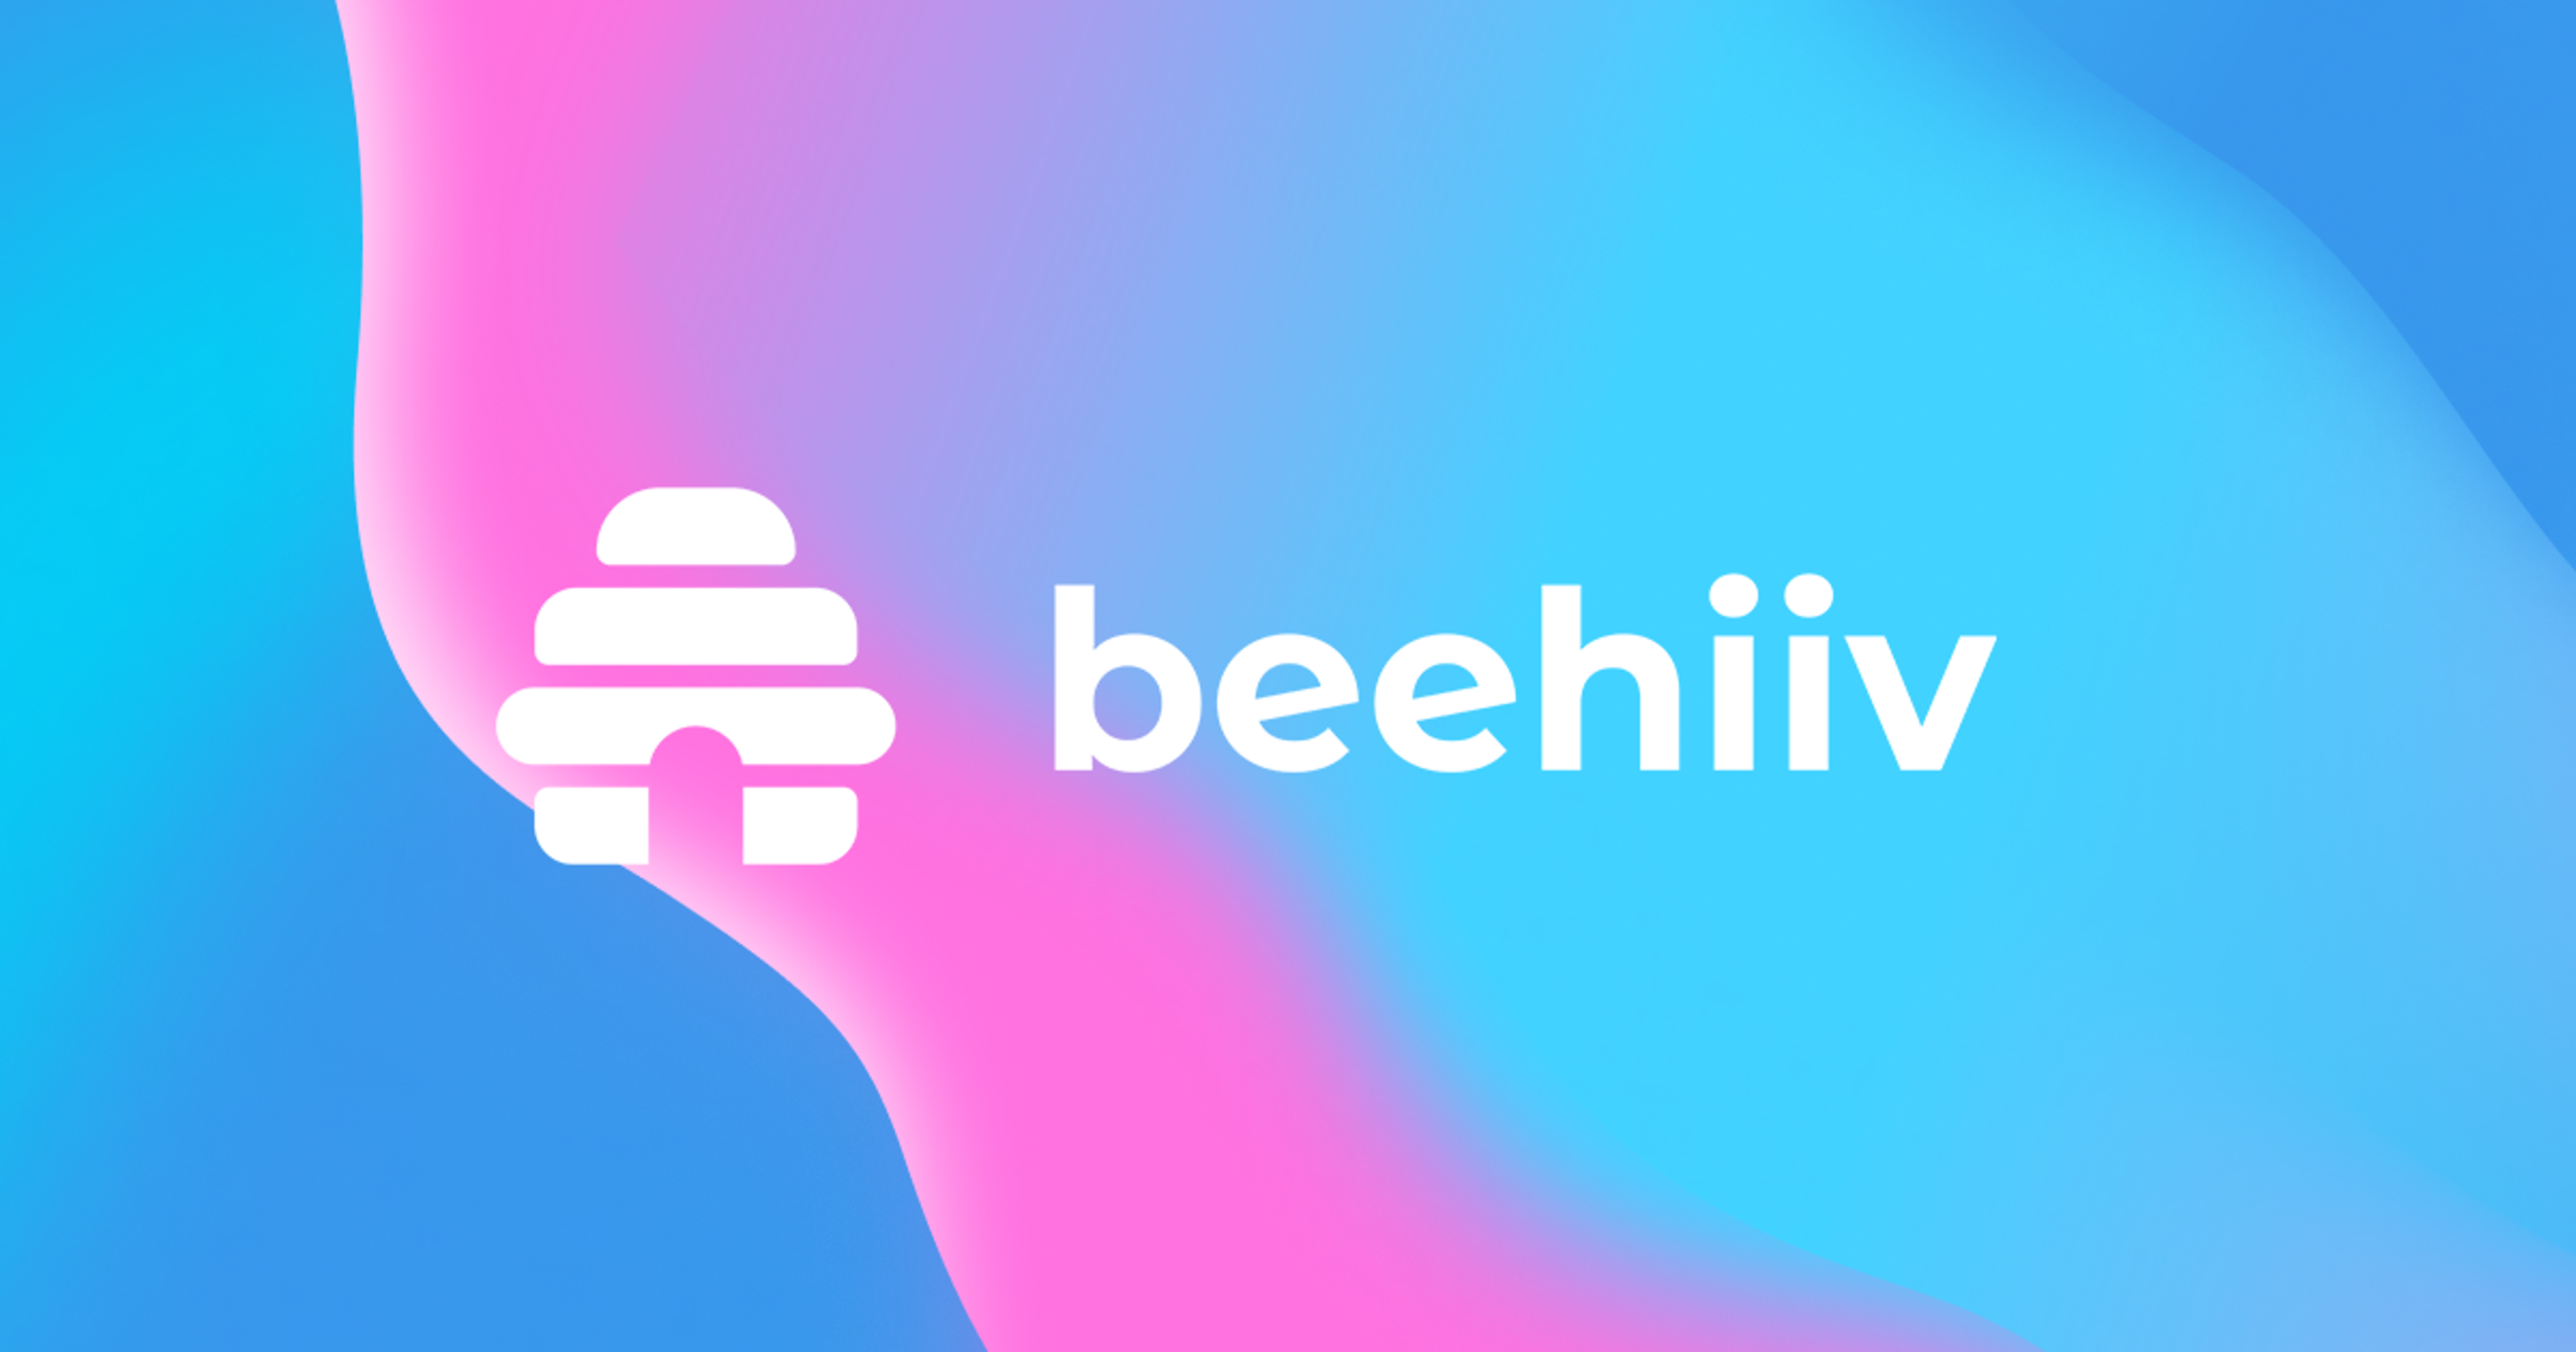 Newsletter Platform Beehiiv Bags $1.6M To Help Writers &#39;Scale And Monetize&#39; Their Work